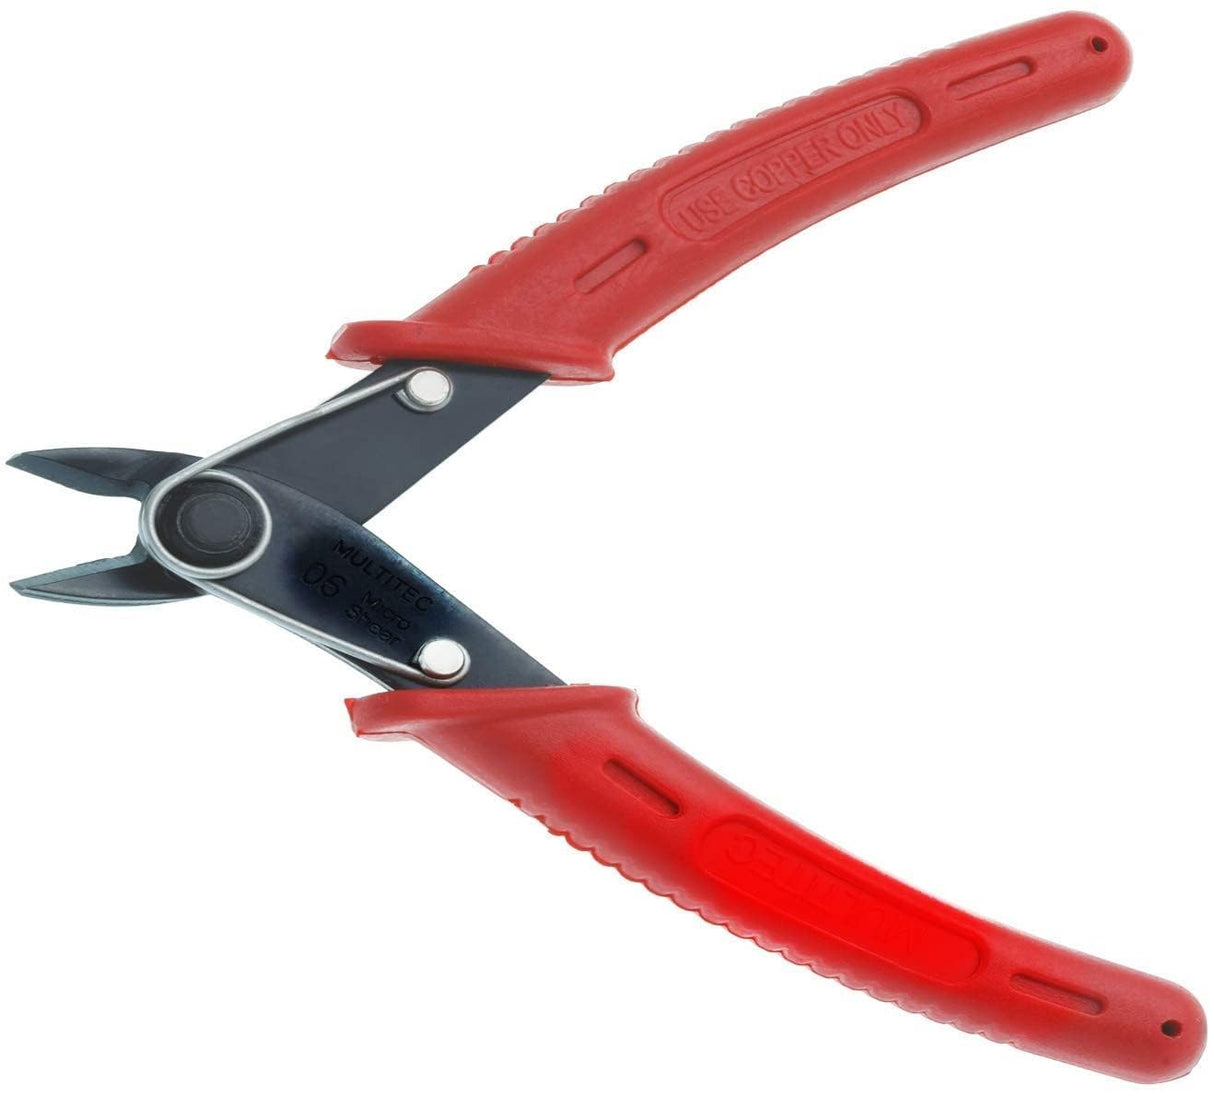 SCHOFIC 06 Nippers and Micro Shears 06 Wire Cutter from 0.8 to 1.4 mm